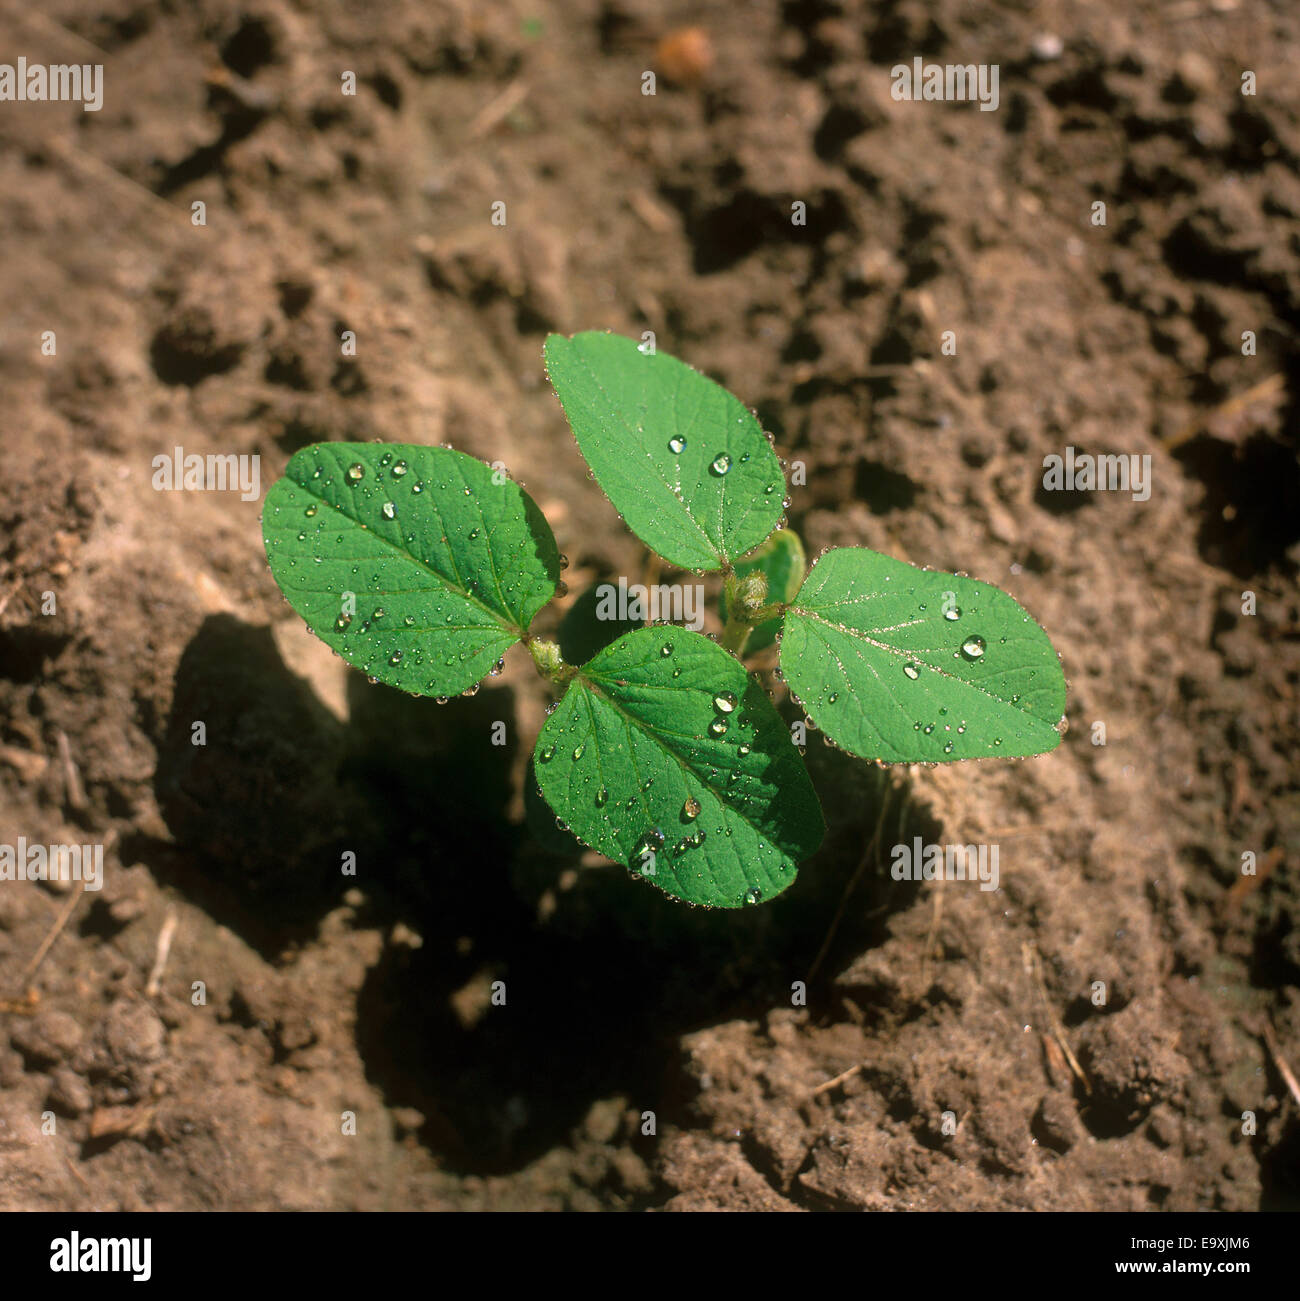 Agriculture - Closeup of soybean seedlings with water droplets / Ontario, Canada. Stock Photo